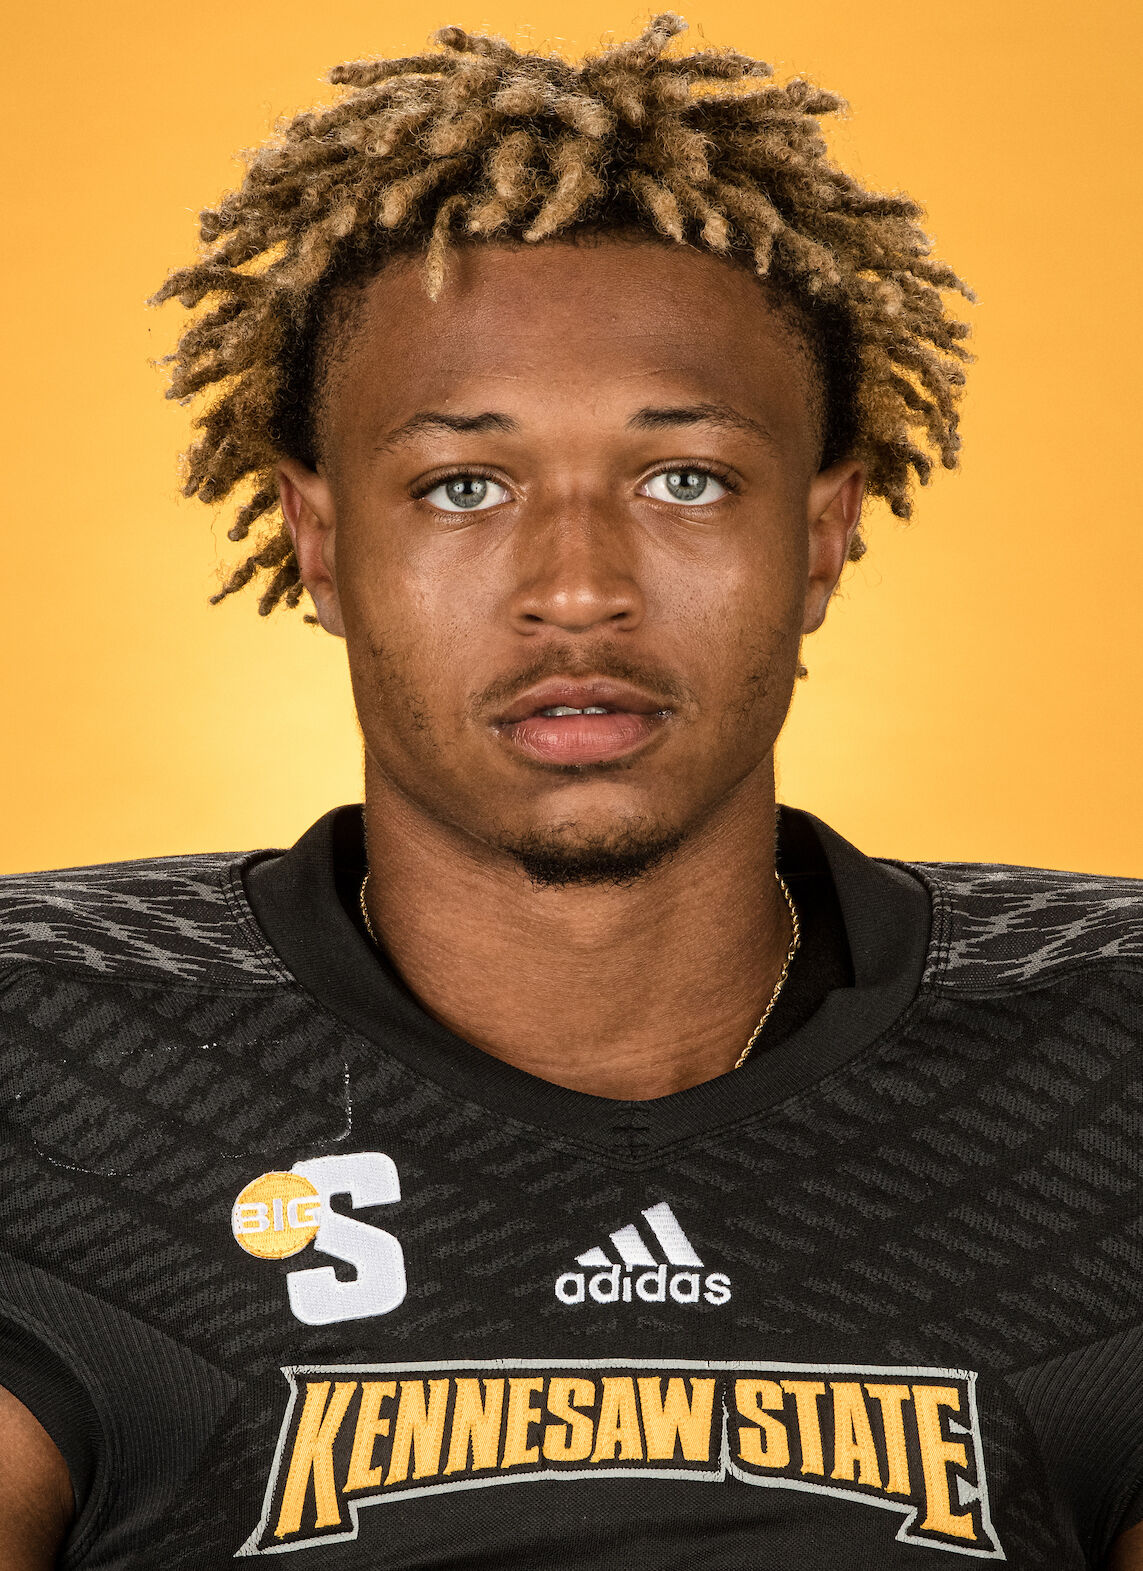 KSU quarterback is dead after his car was found riddled with bullets